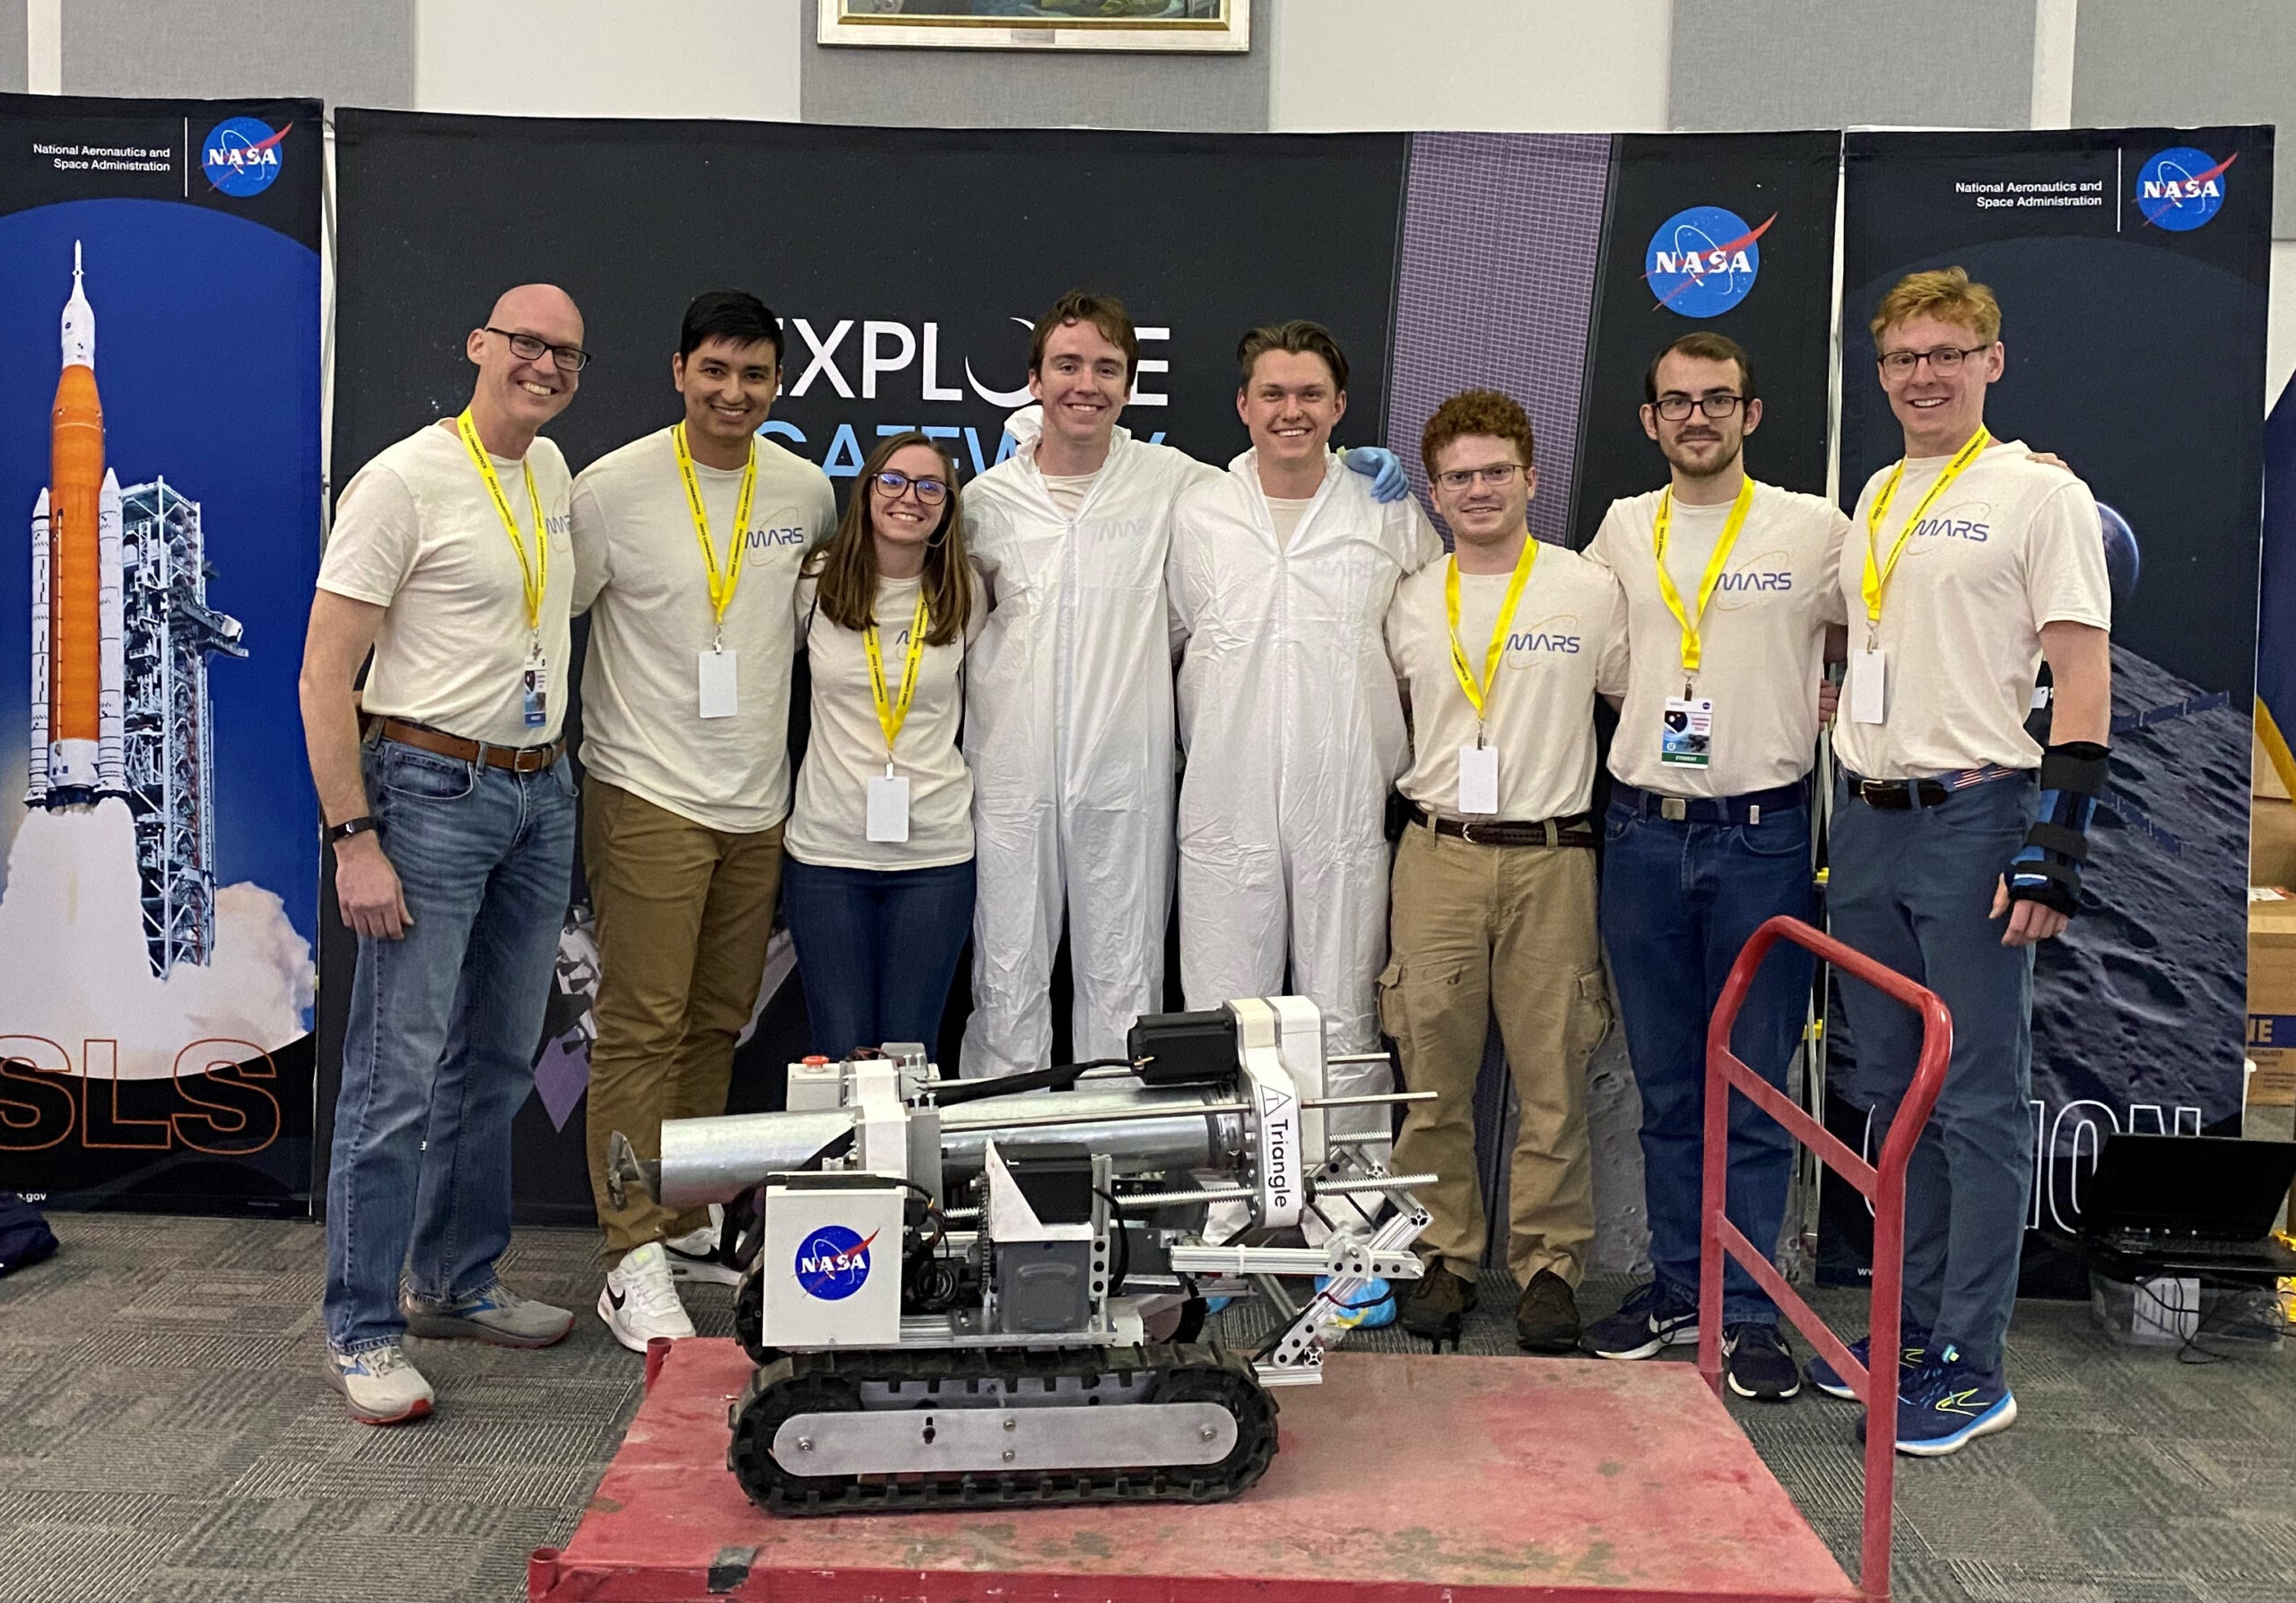 NASA ranks Marquette’s lunar mining robot project 3rd out of 71 teams